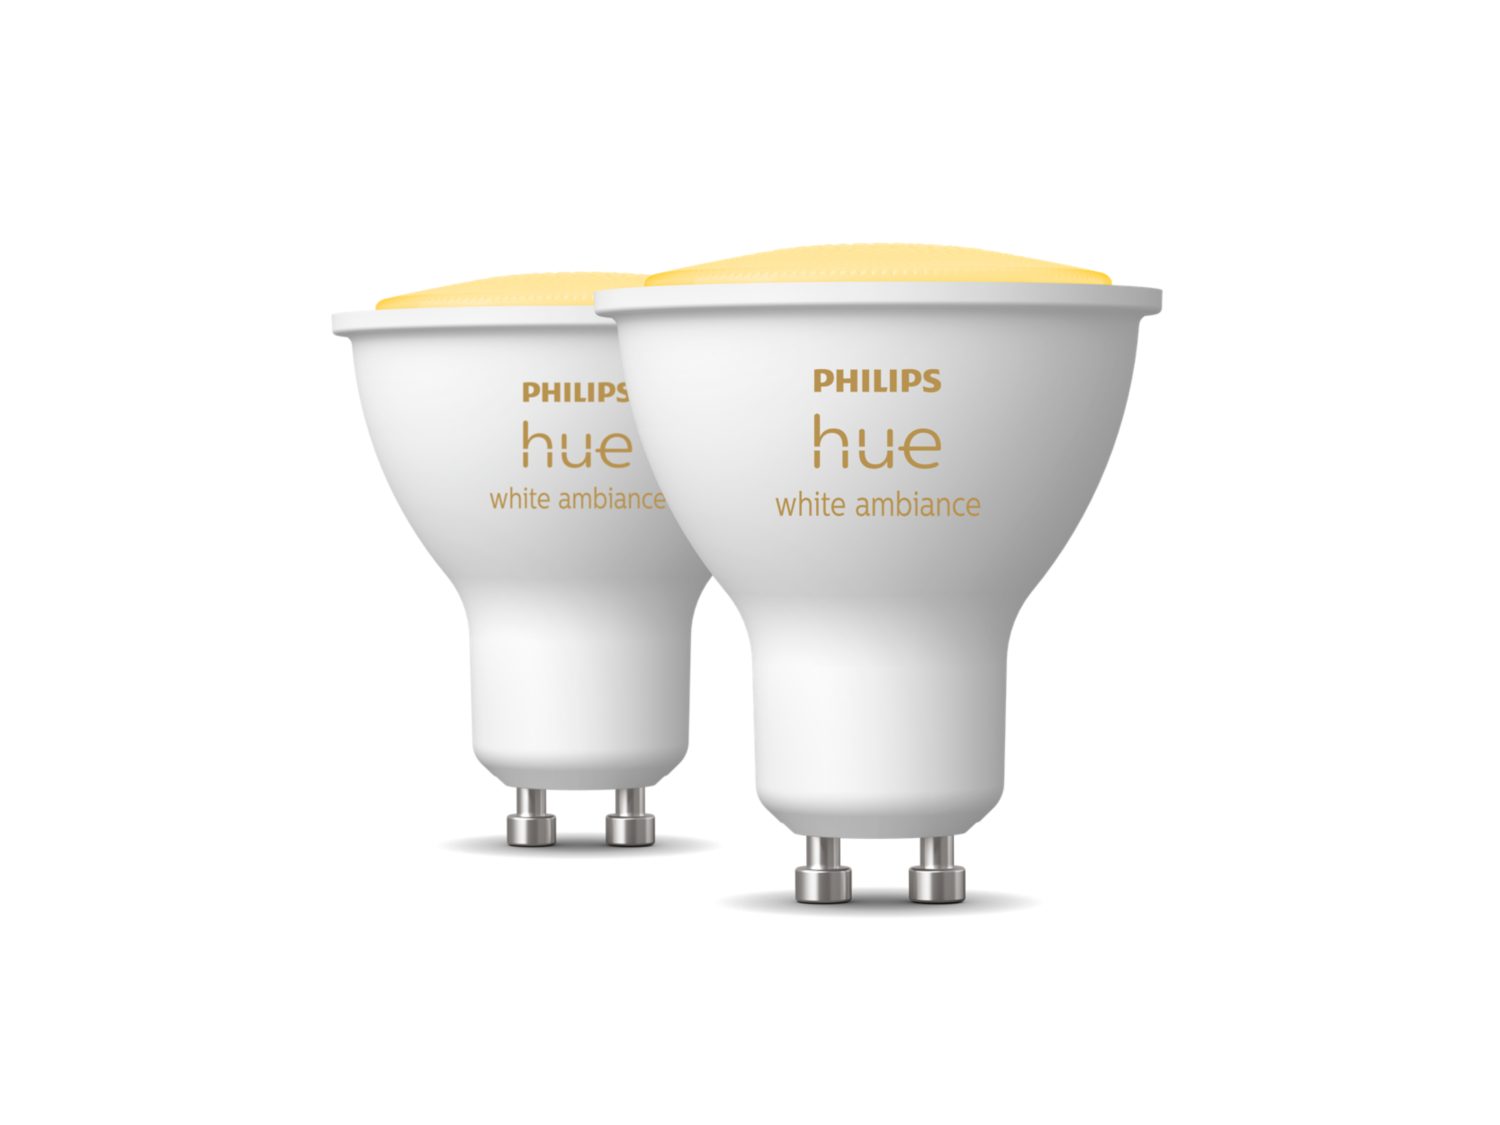 Philips Hue GU10 (2-pack) featured